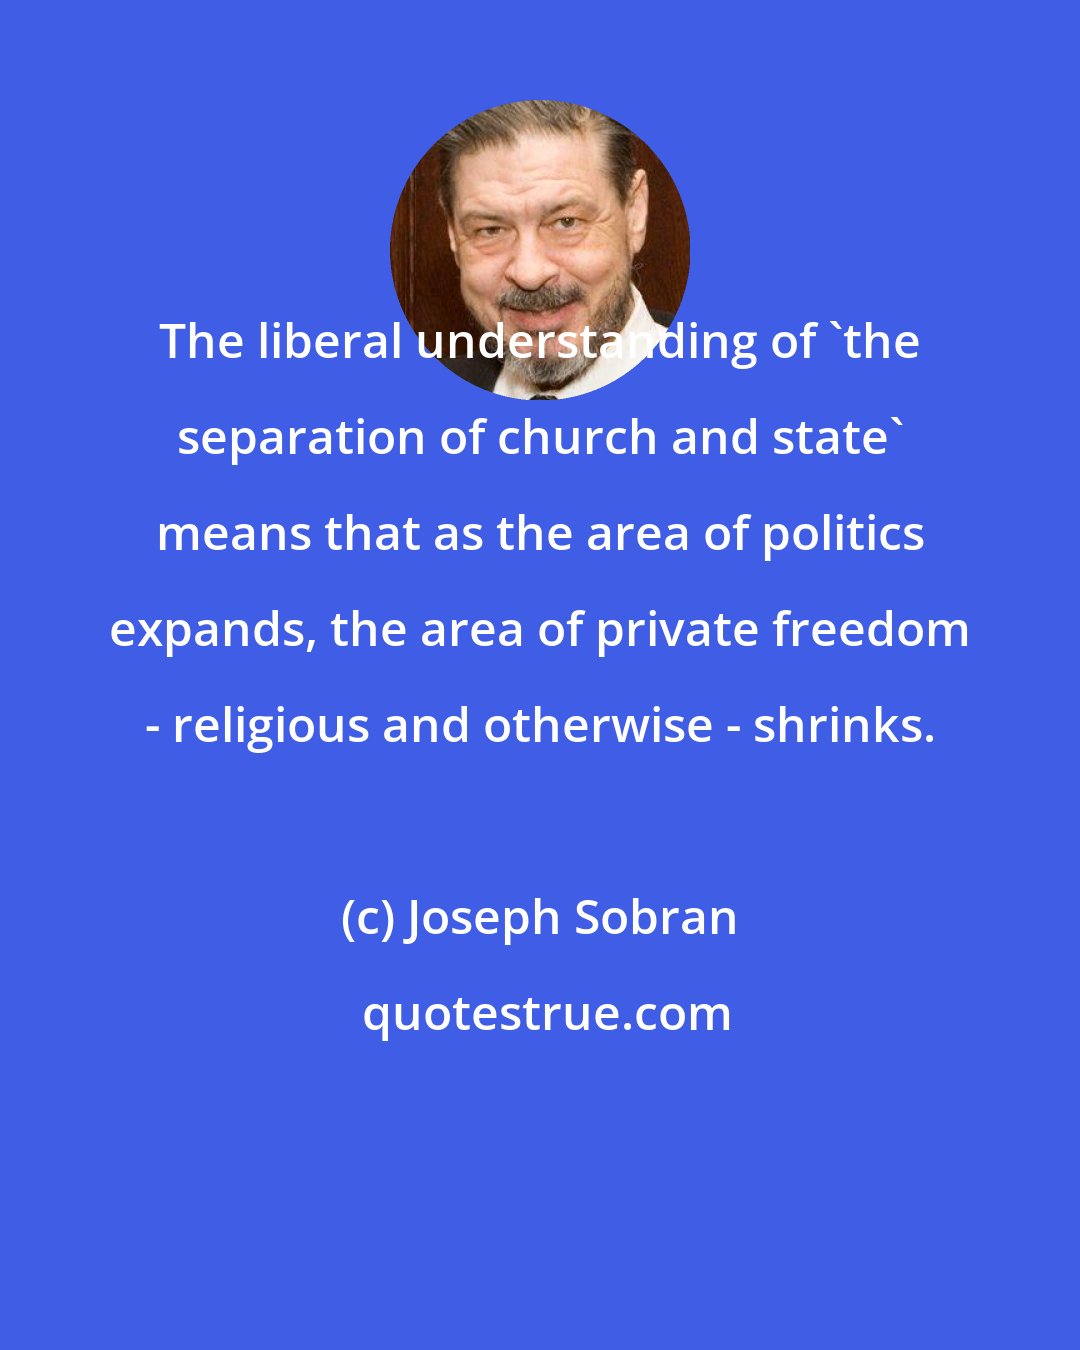 Joseph Sobran: The liberal understanding of 'the separation of church and state' means that as the area of politics expands, the area of private freedom - religious and otherwise - shrinks.